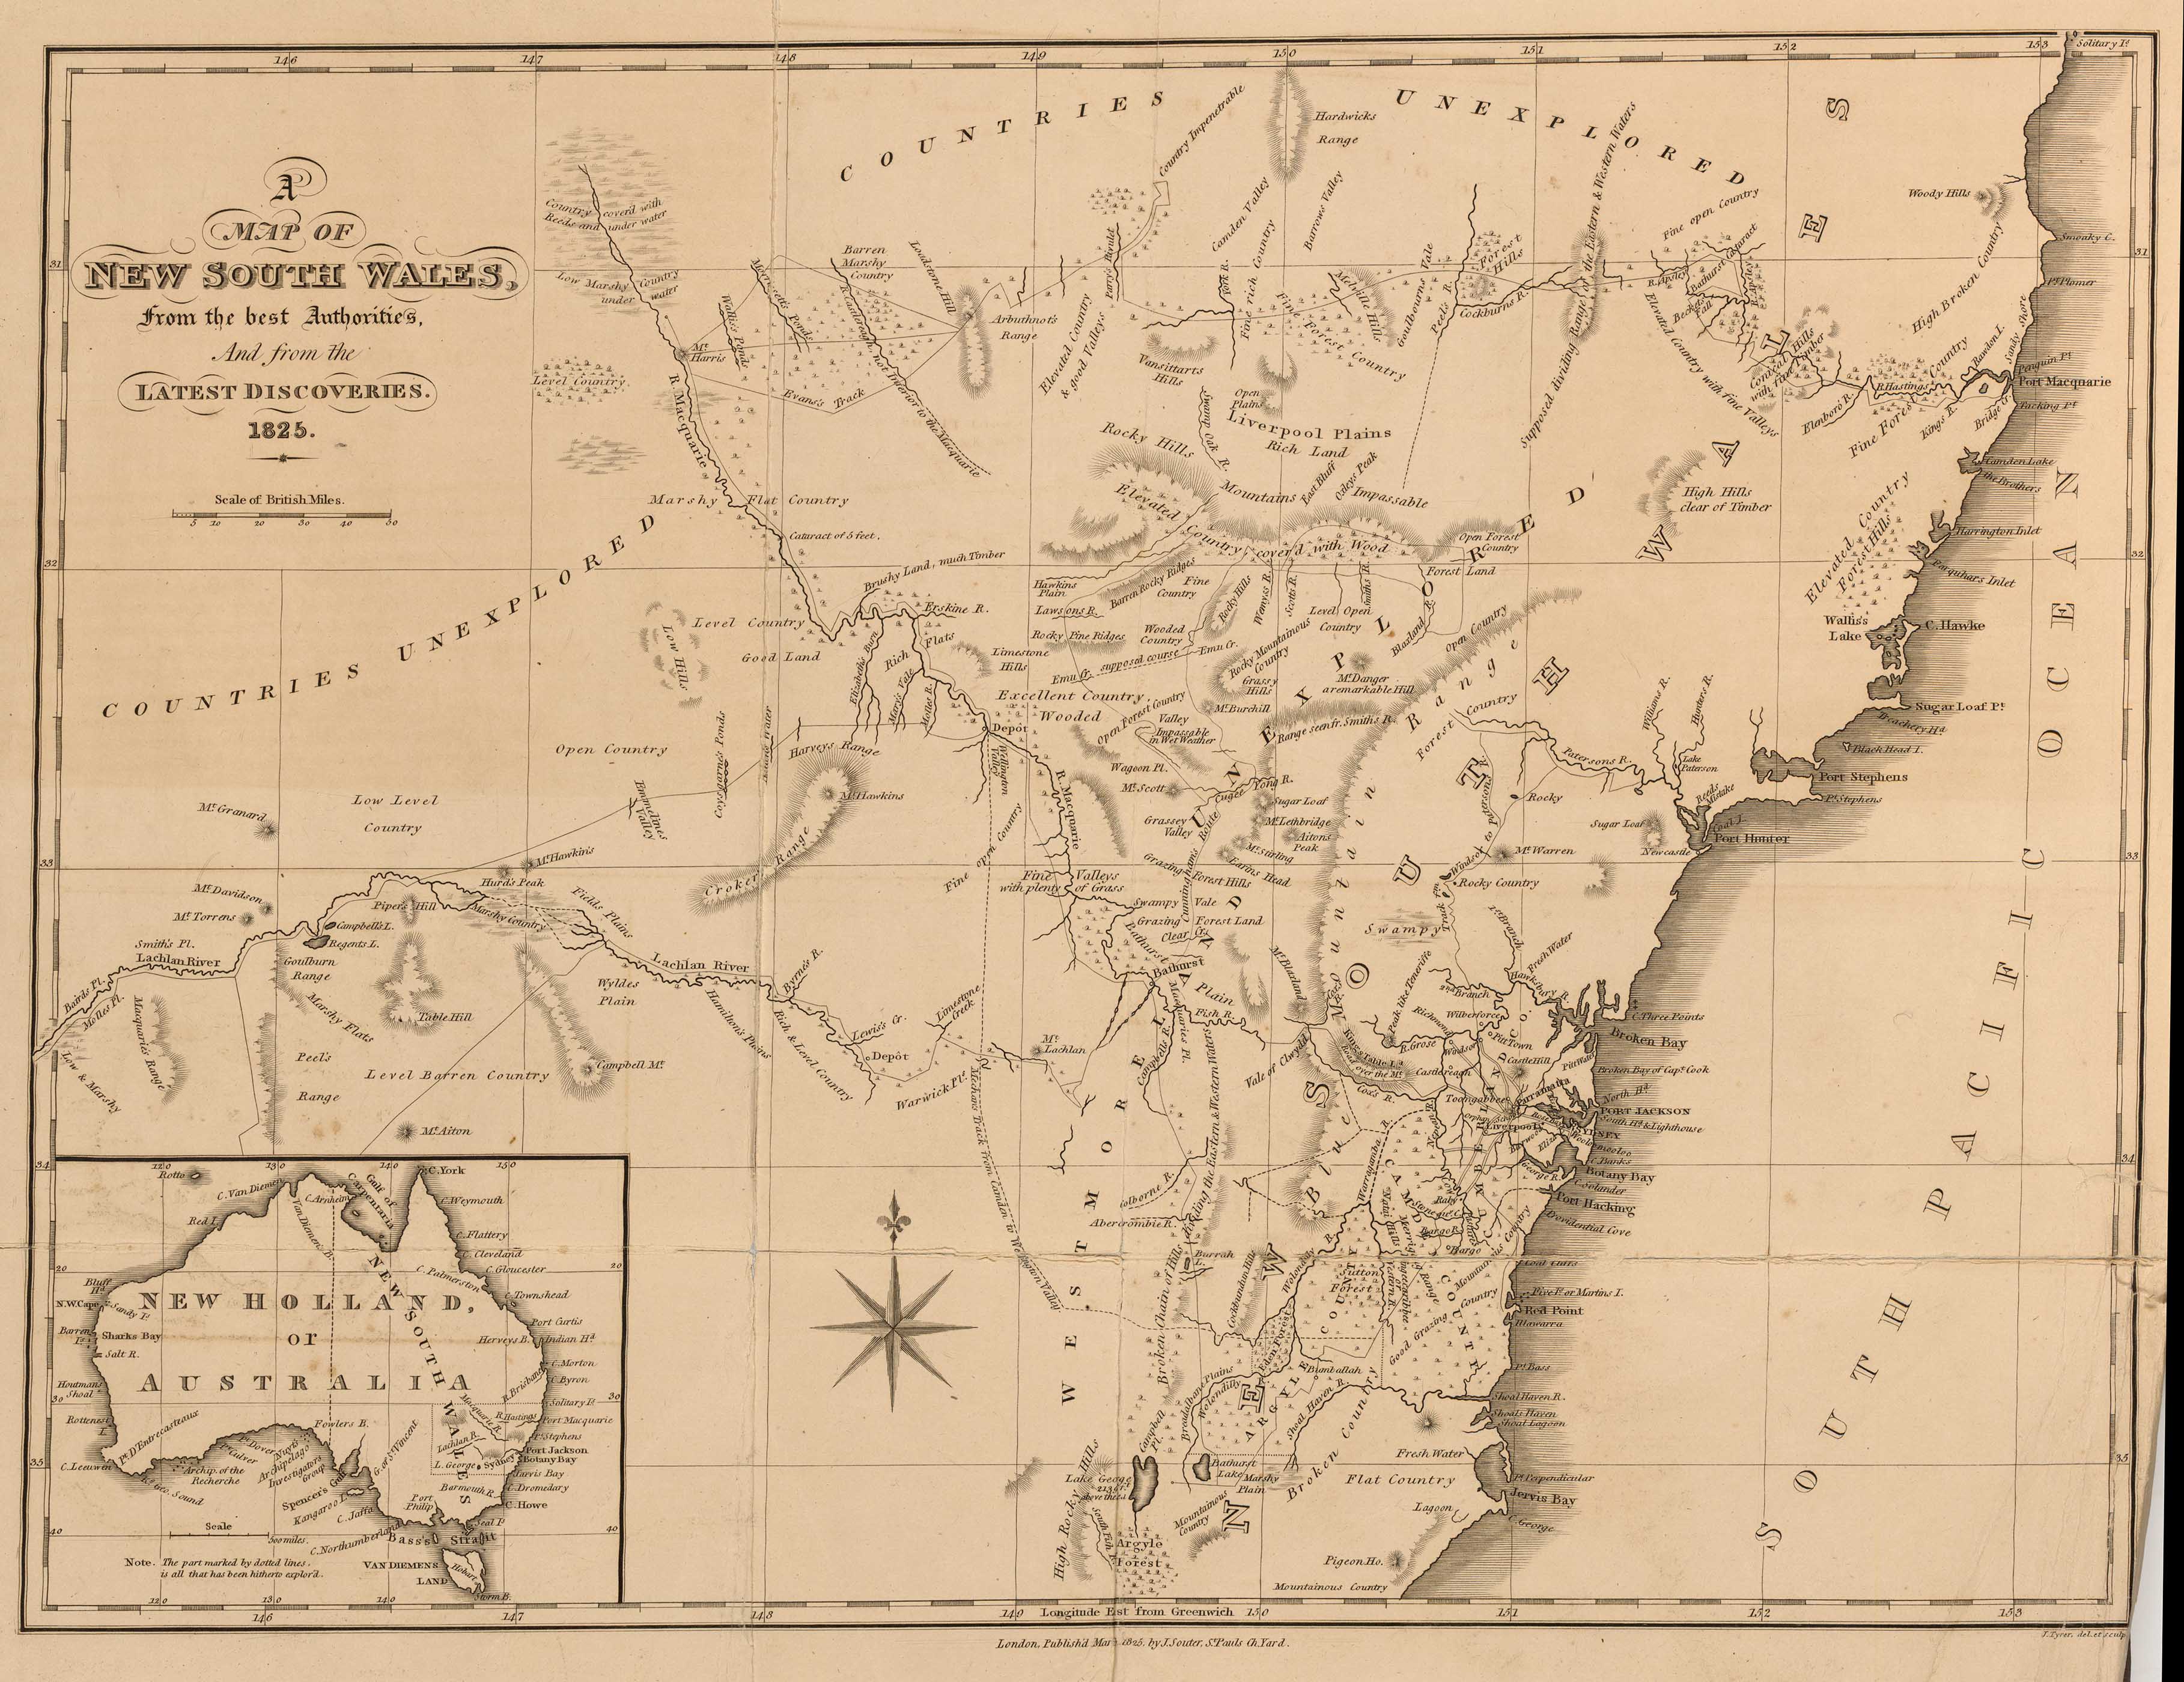 A map of New South Wales, 1825.